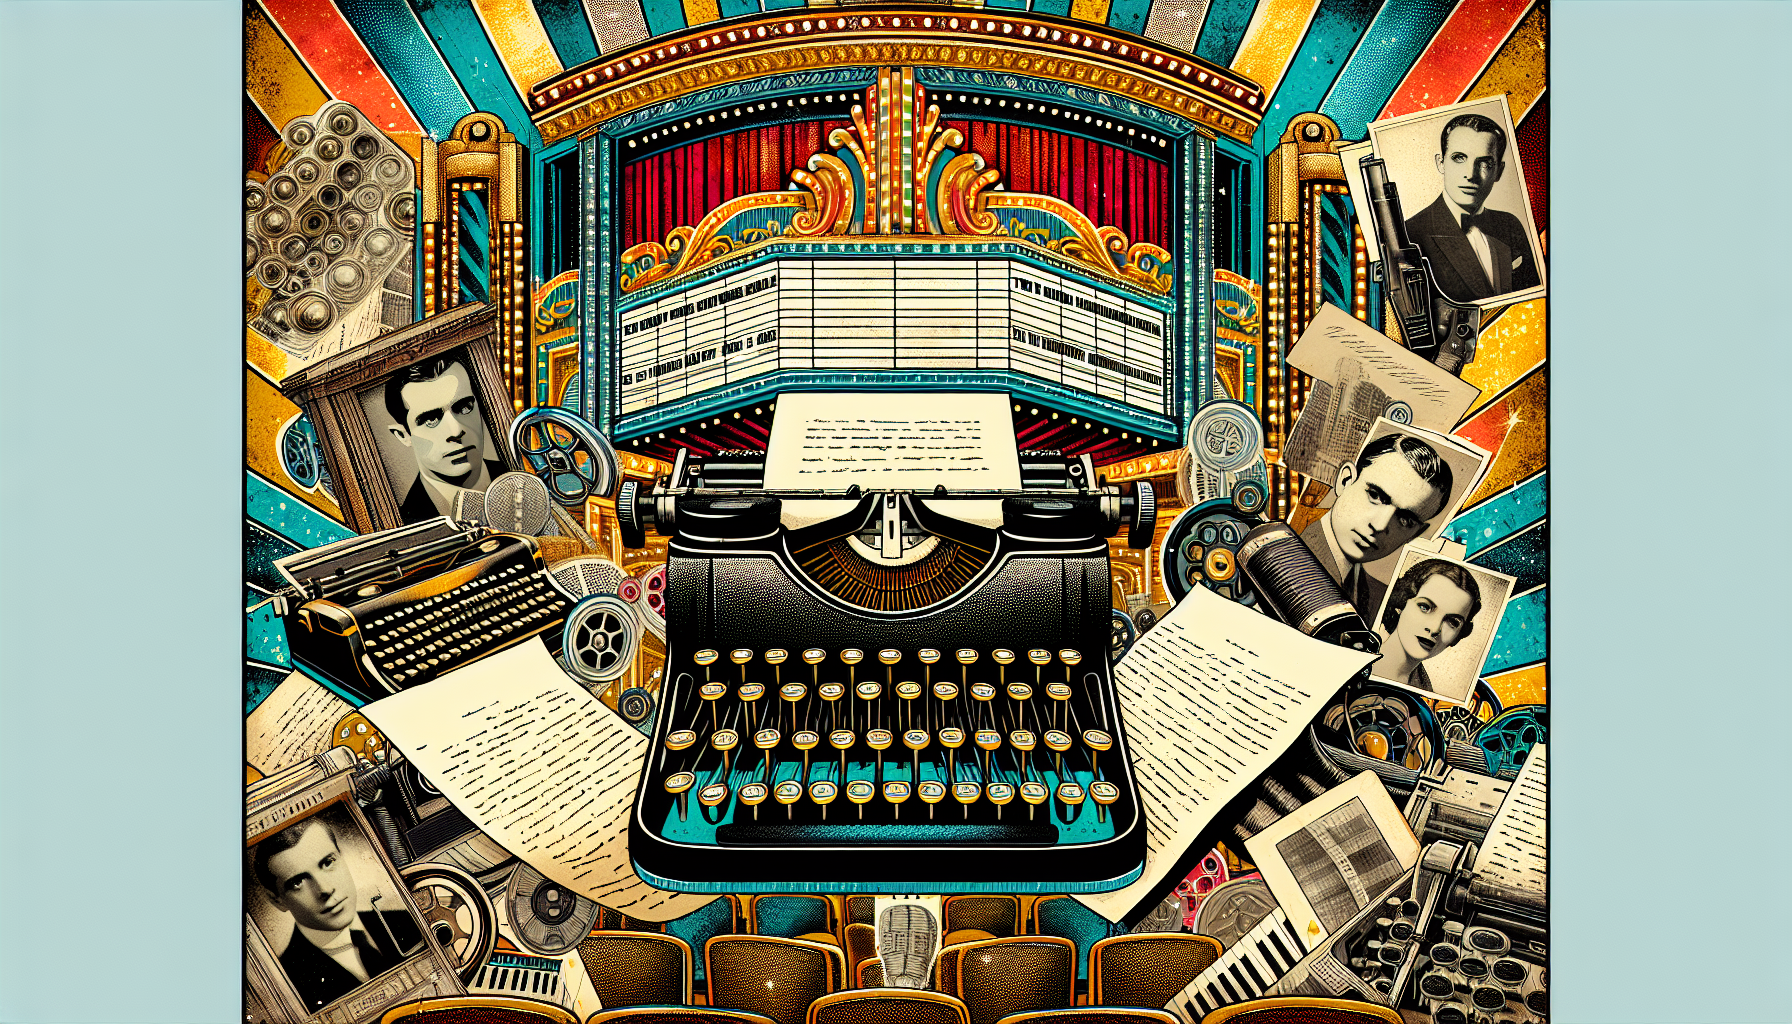 A collage of vintage typewriters, old scripts, and black-and-white photos of the top 50 screenwriters in cinema history, set in an ornate, classical film theater with golden details and marquee lights